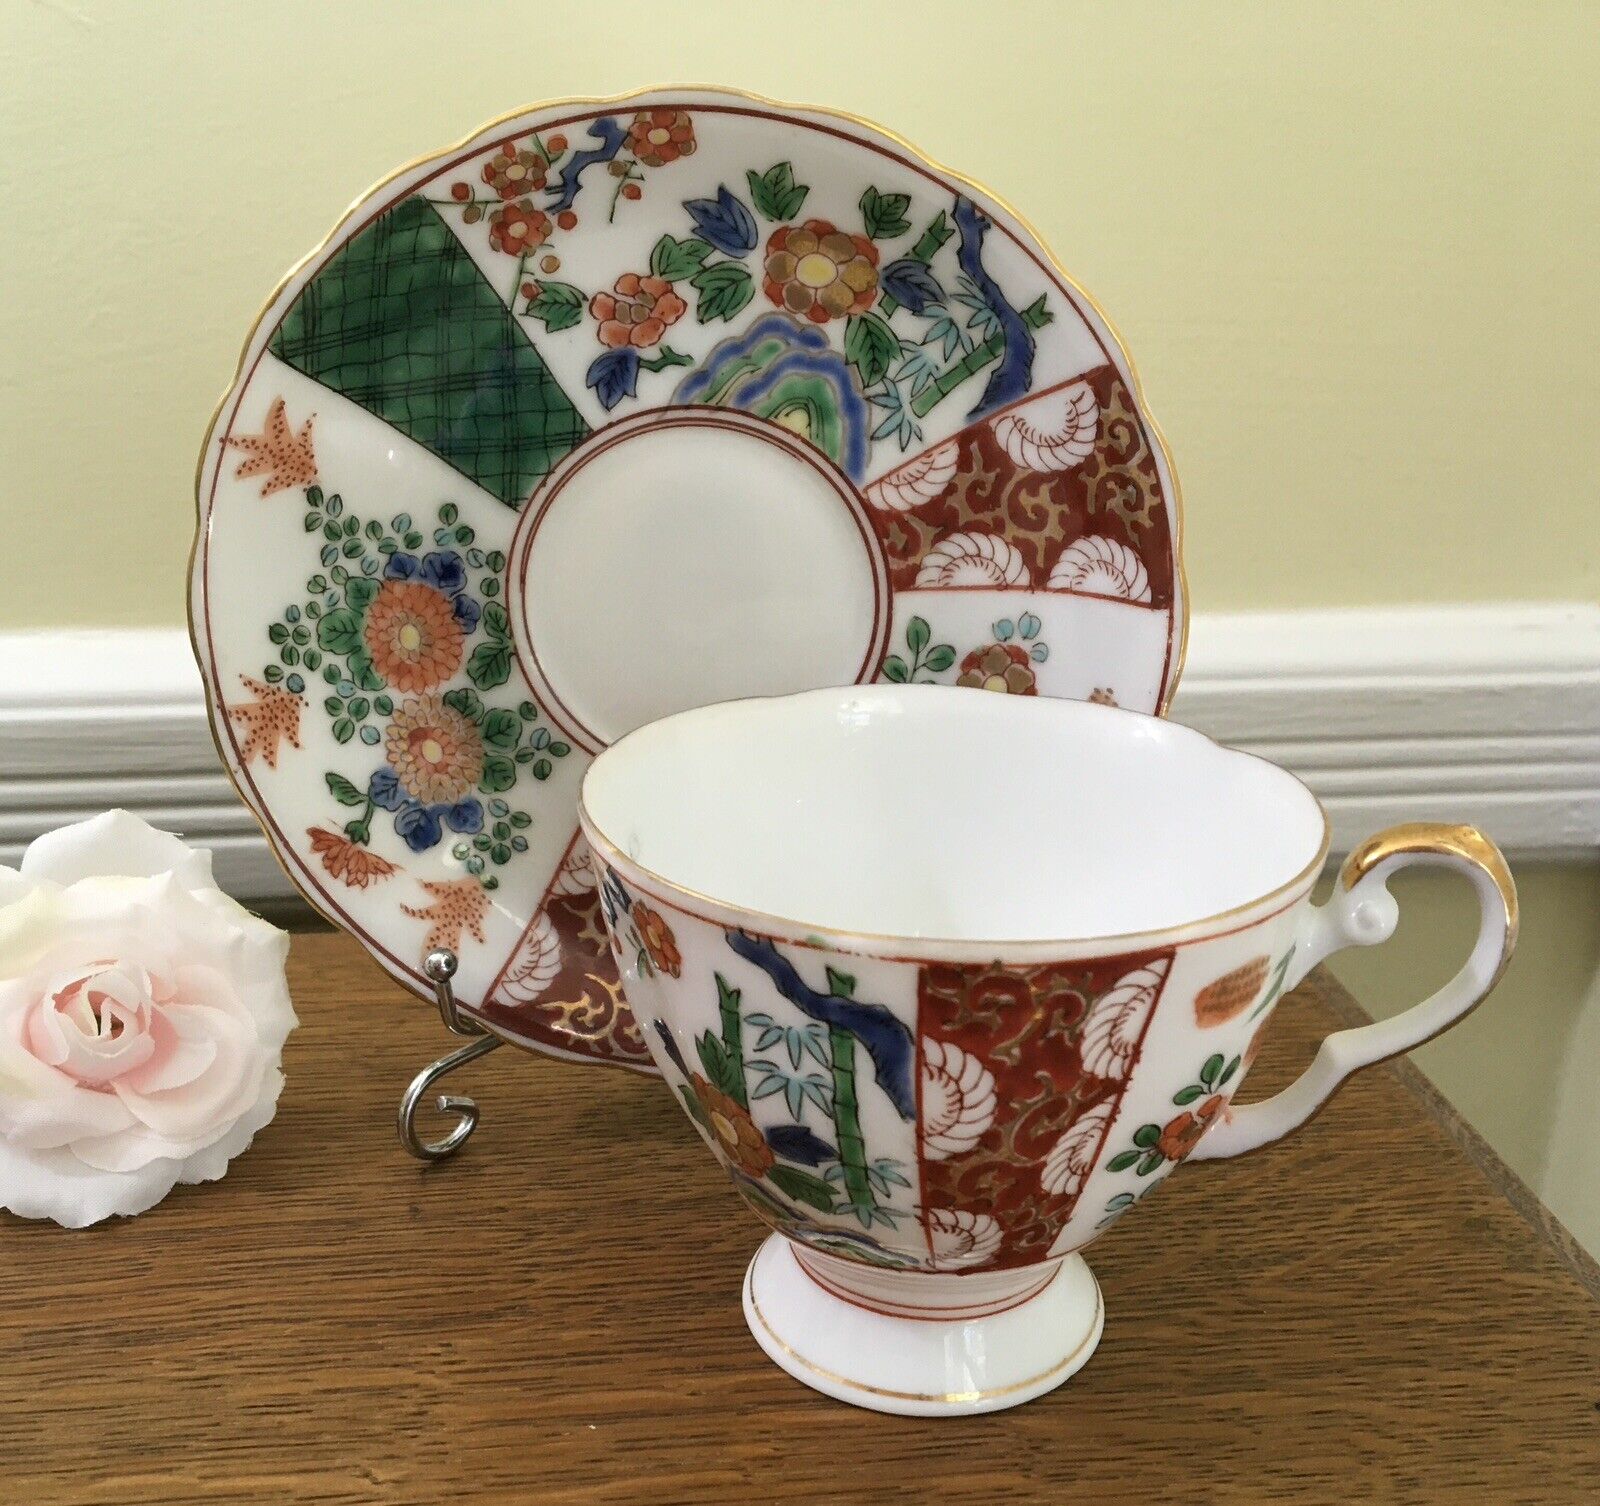 Vintage UCAGCO Handpainted Imari with Gold Accents Teacup & Saucer made in Japan